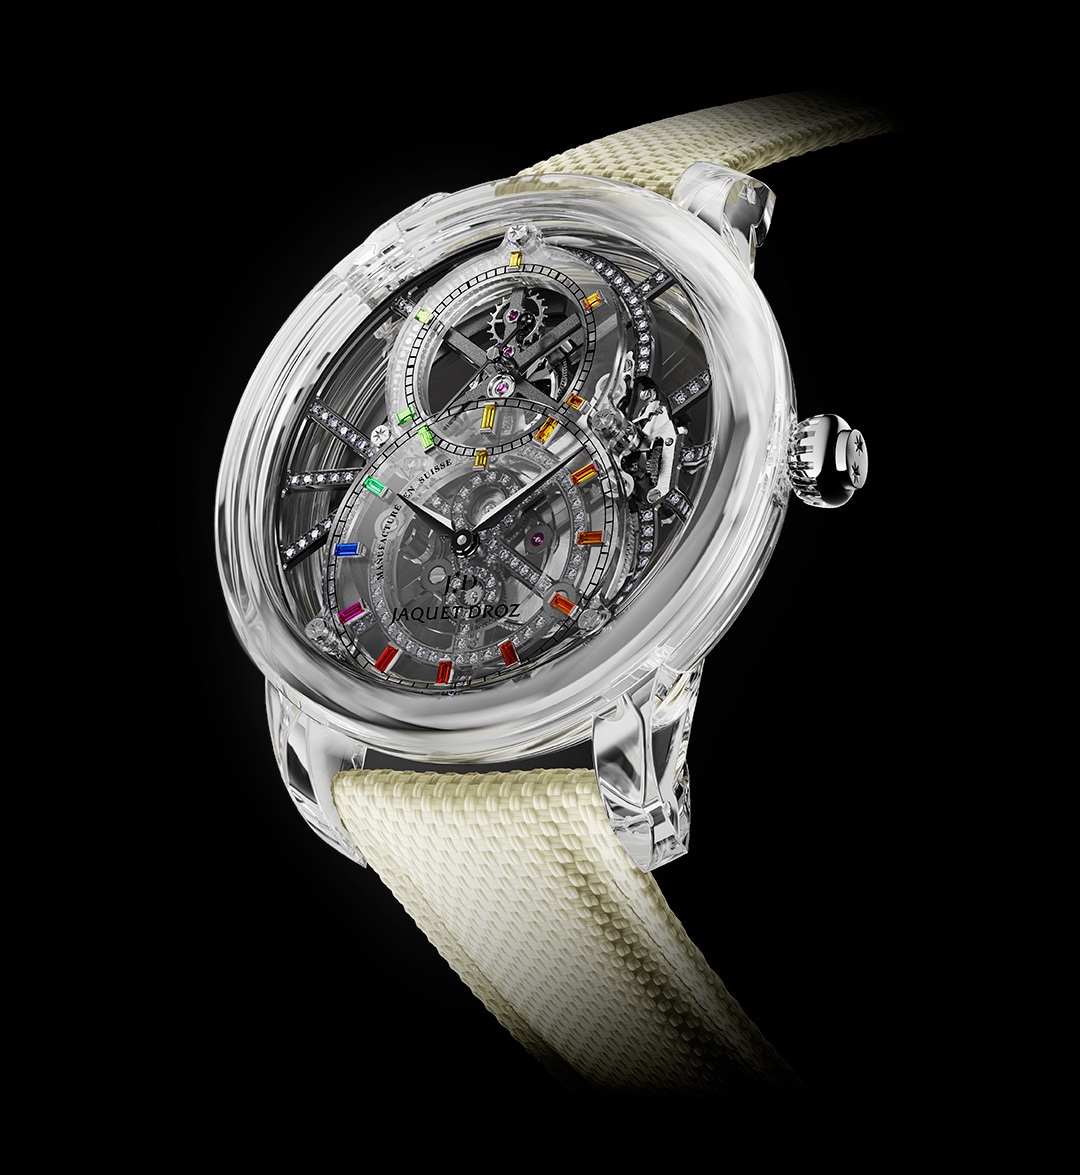 Tourbillon Skelet Sapphire :<br>pushing the Philosophy of the Unique still further